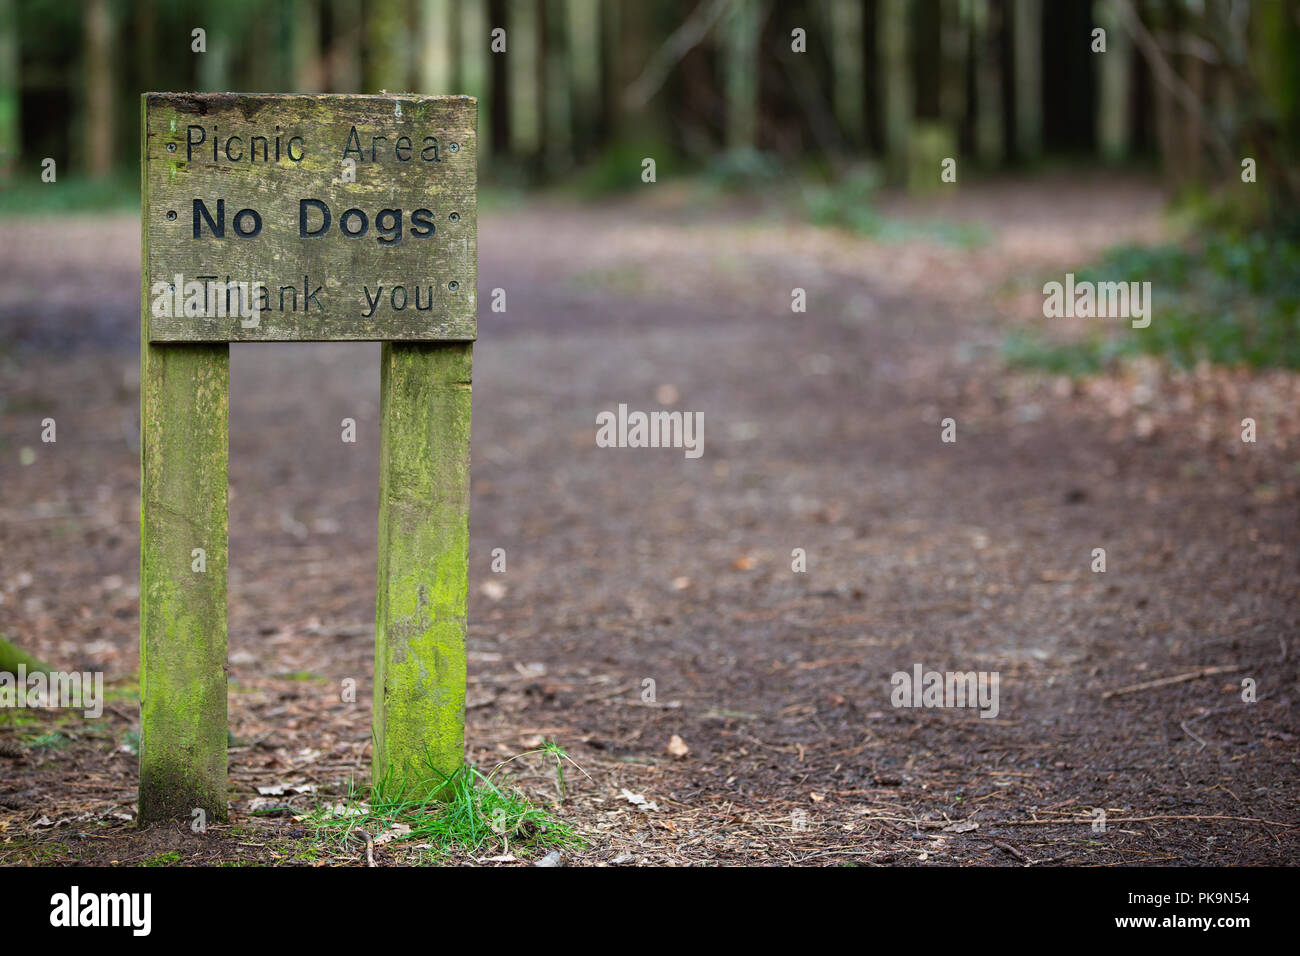 No dogs sign in picnic area Stock Photo